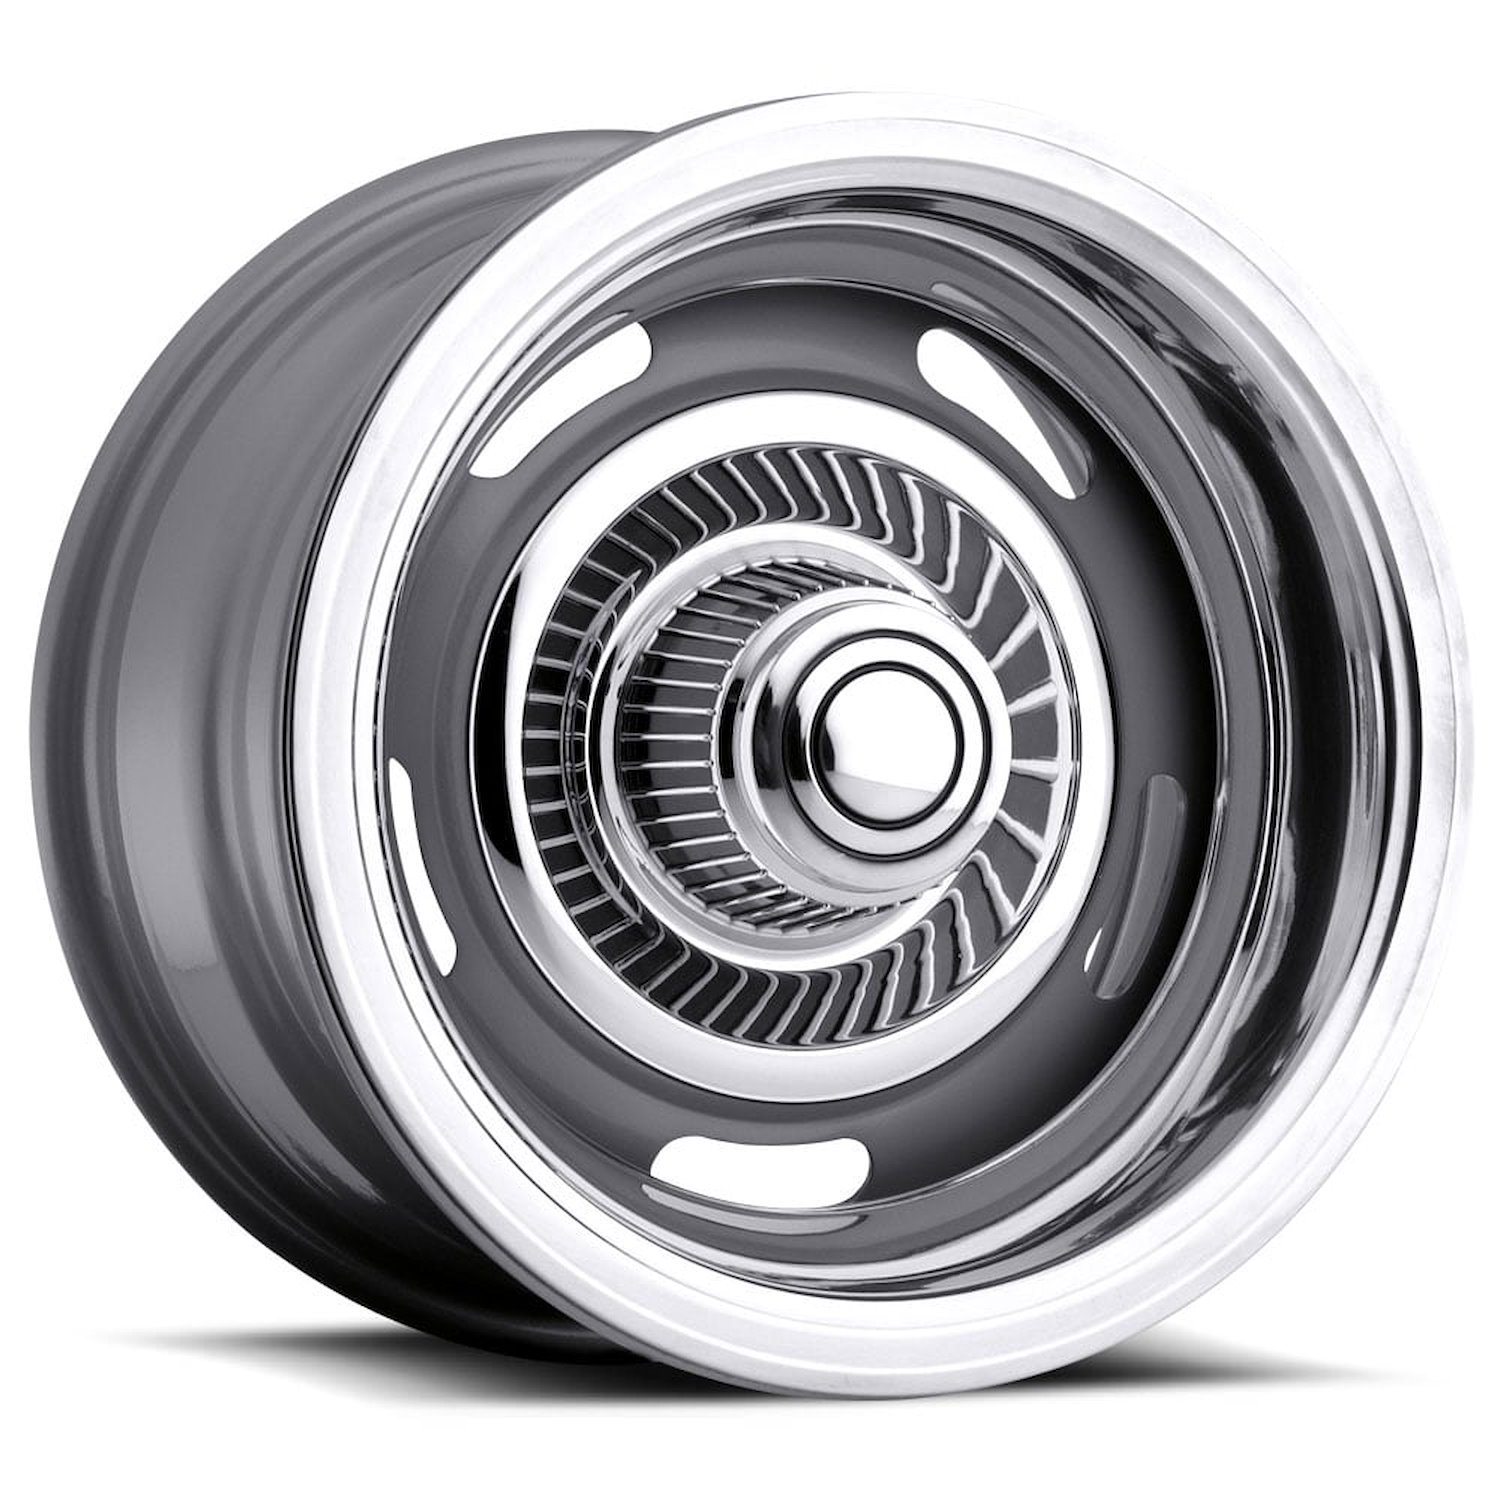 Series 55 Rally Wheel [Size: 15" x 7"] Silver Powder Coated Finish